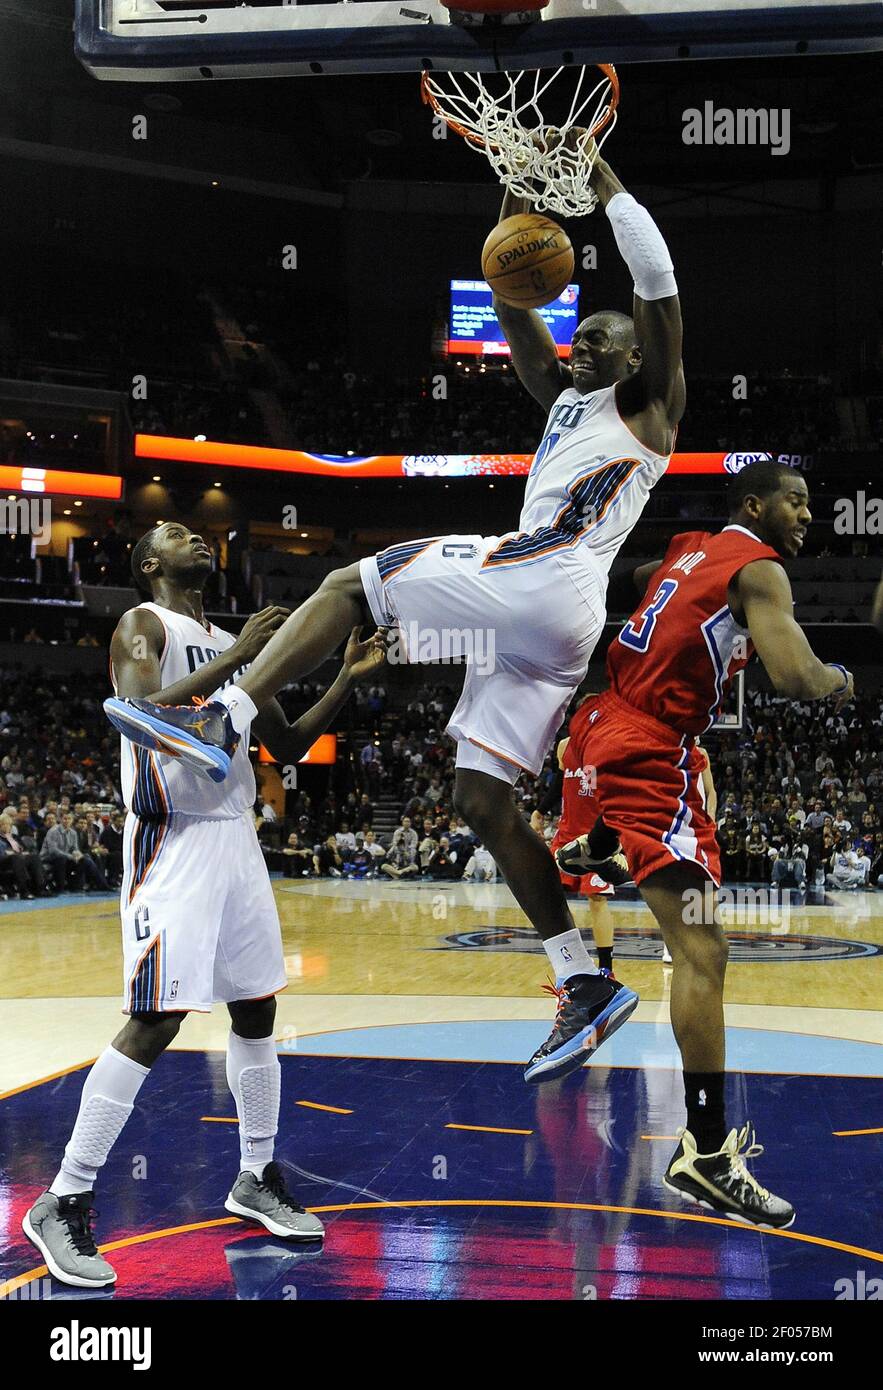 The Charlotte Bobcats' Bismack Biyombo gets a dunk over the Los